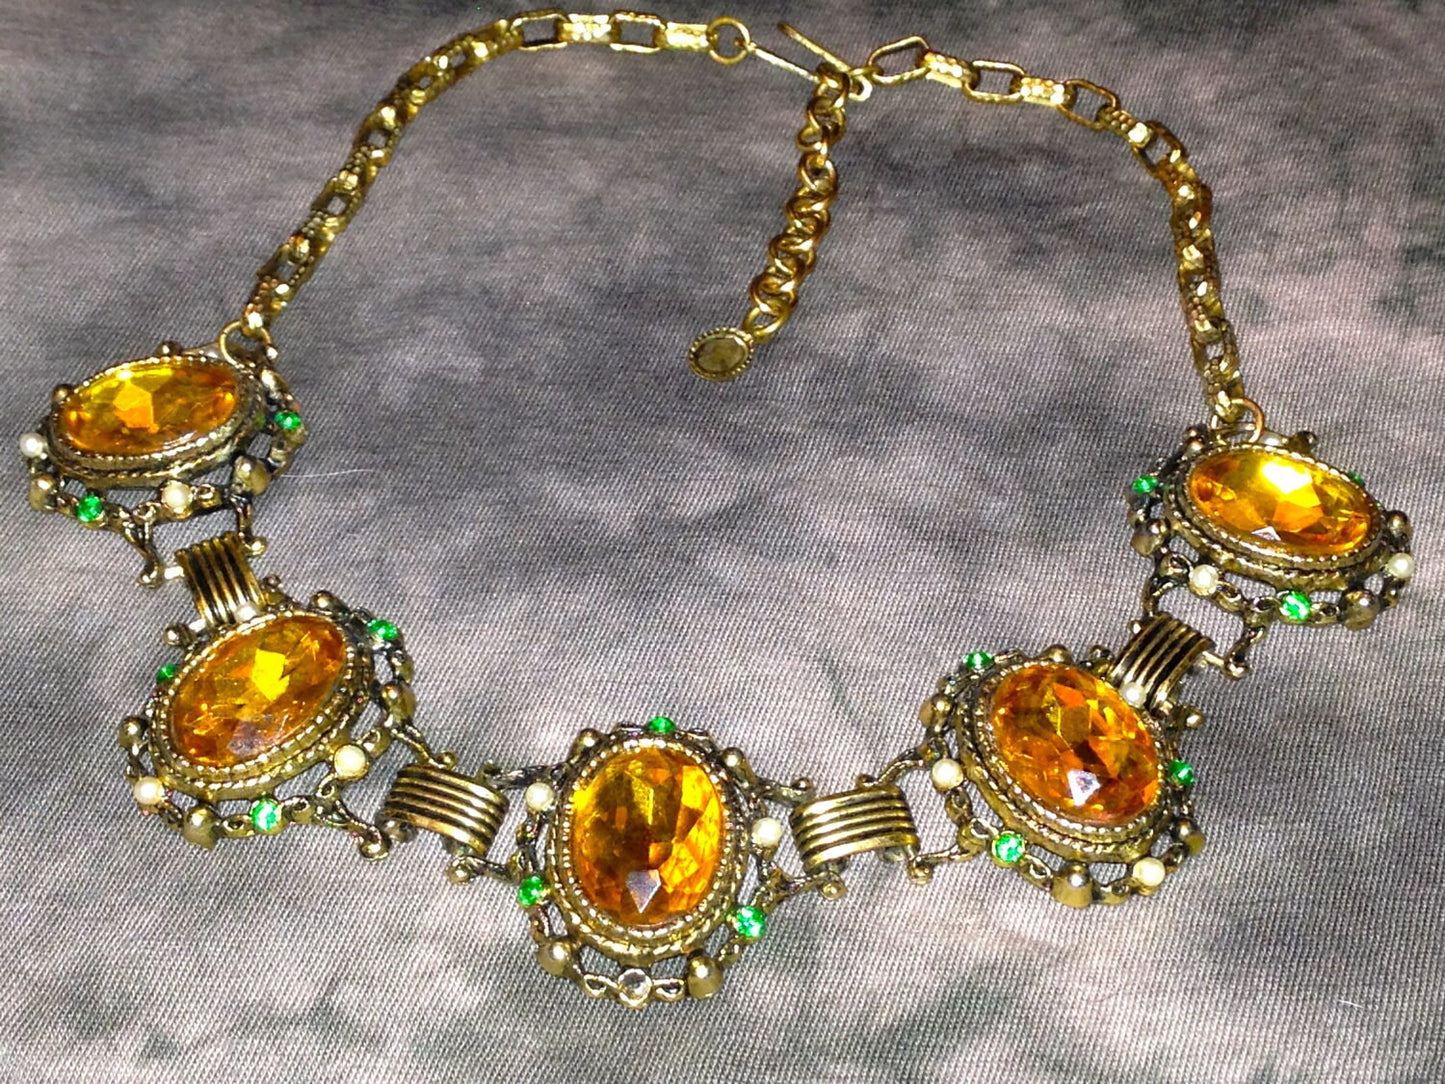 Incredible Victorian Bookchain Chunky Citrine & Peridot Crystal Choker Necklace